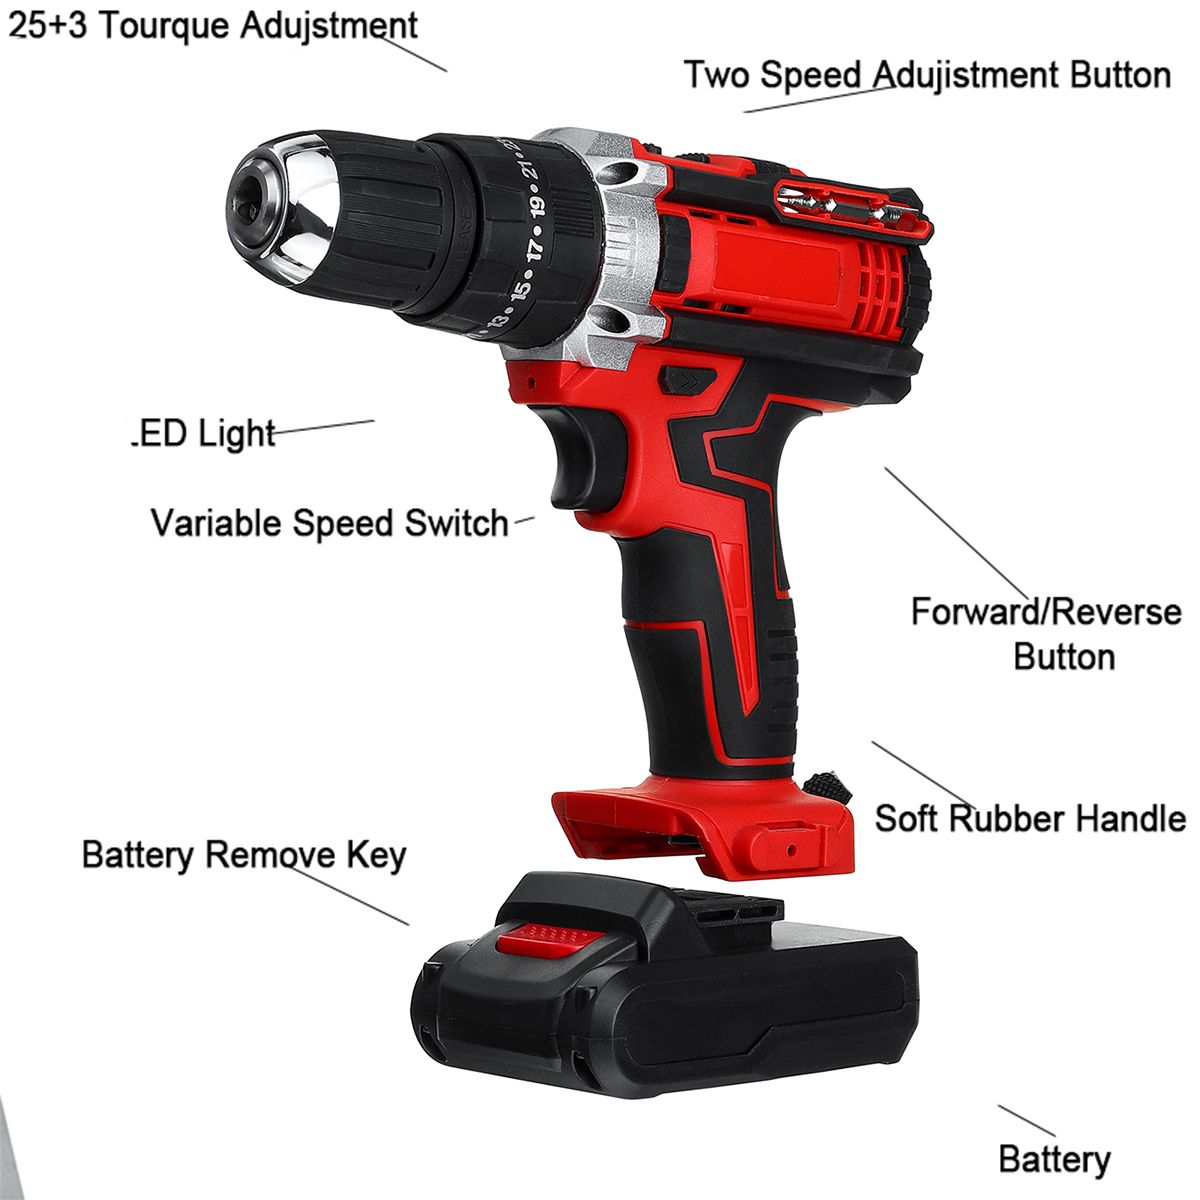 48V-253-Gear-Rechargable-Electric-Drill-Cordless-Impact-Drill-With-1-or-2-Li-ion-Battery-With-LED-Wo-1599136